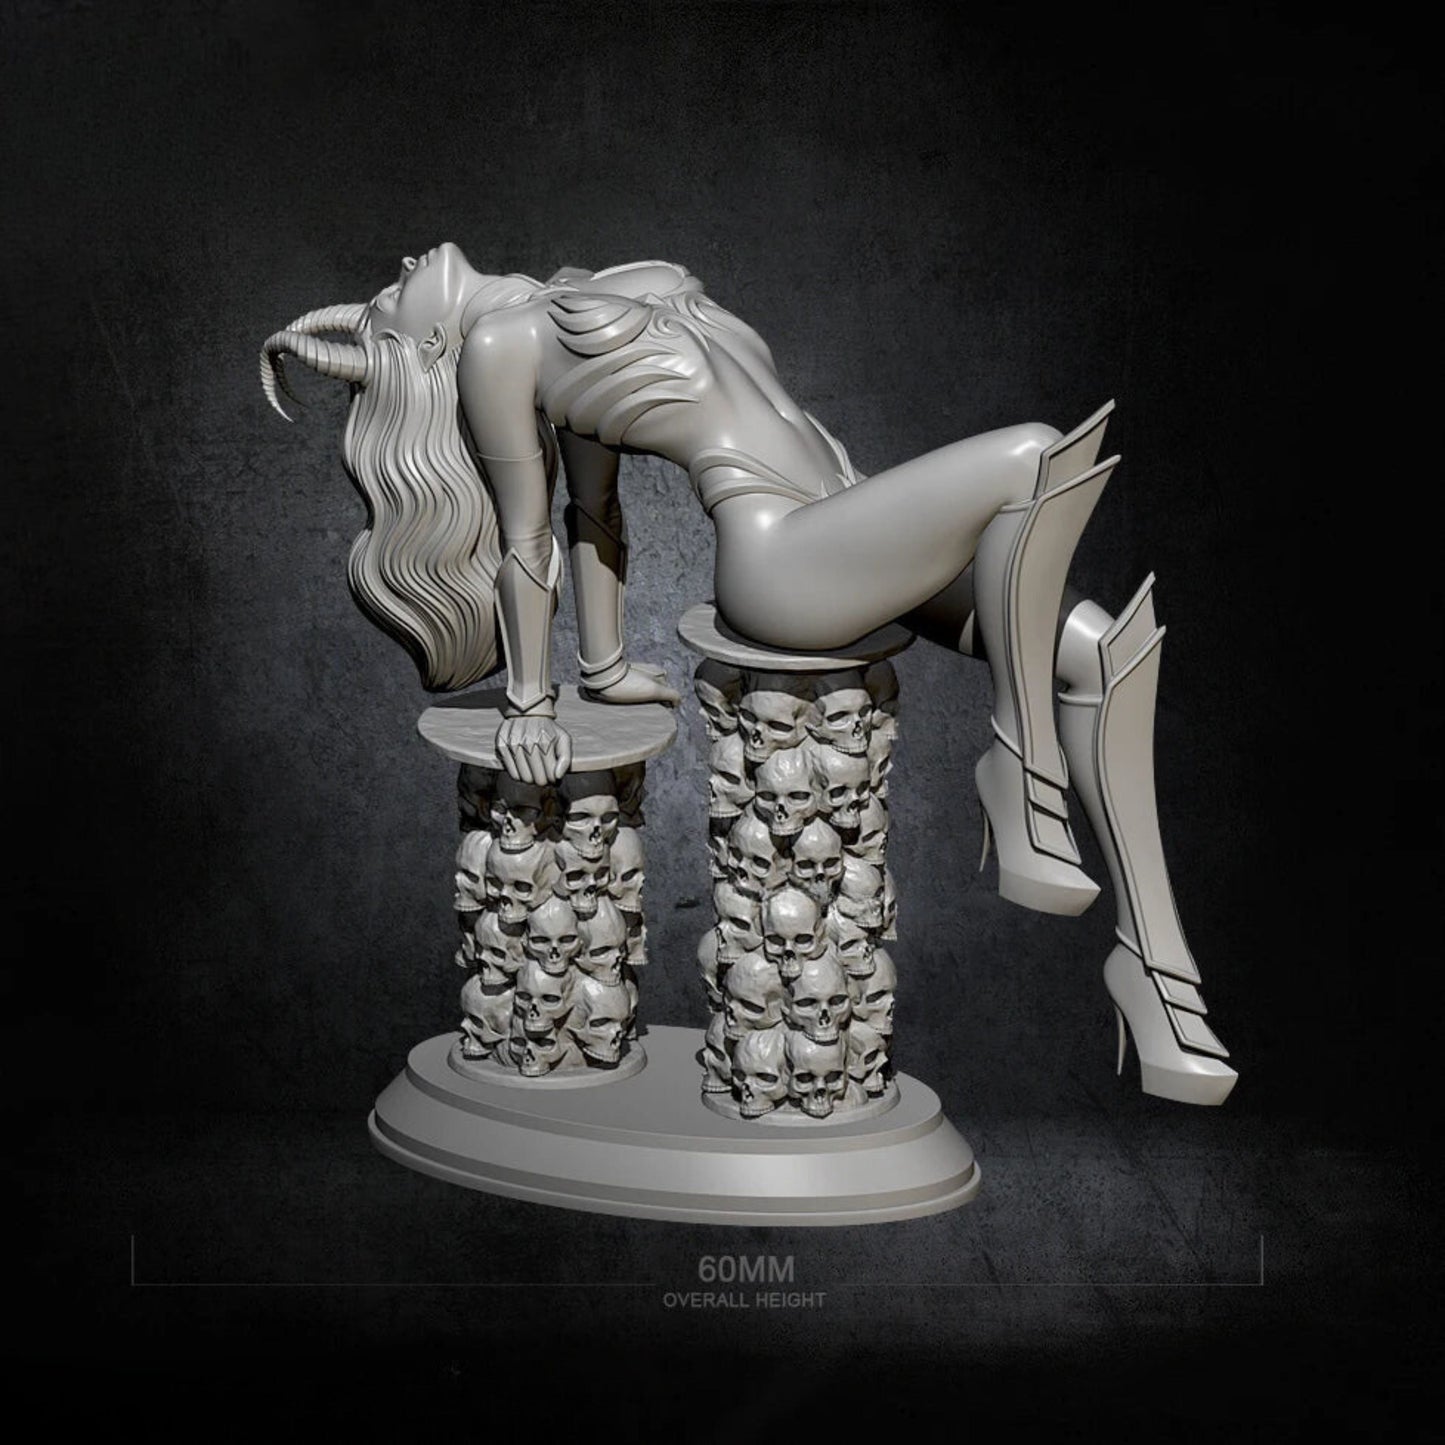 18+ Collector's 3D Printed Model: 60mm Resin model kits figure toy self-assembled.